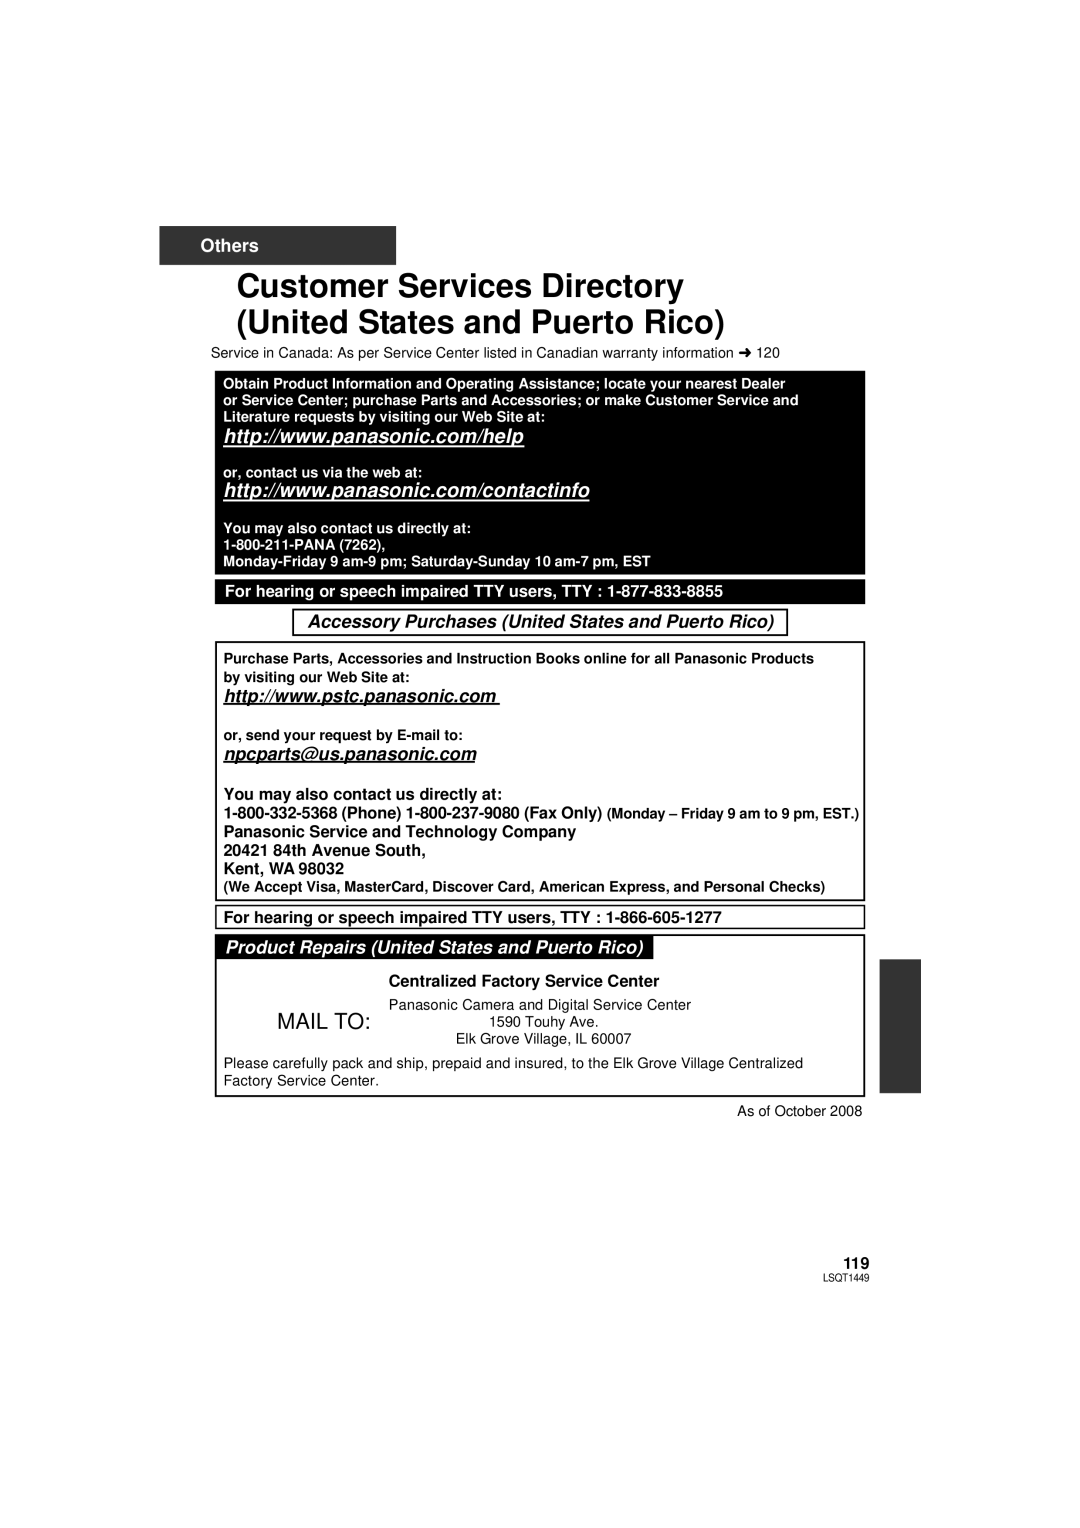 Panasonic SDR-H80PC Customer Services Directory United States and Puerto Rico, Mail To, Others, npcparts@us.panasonic.com 